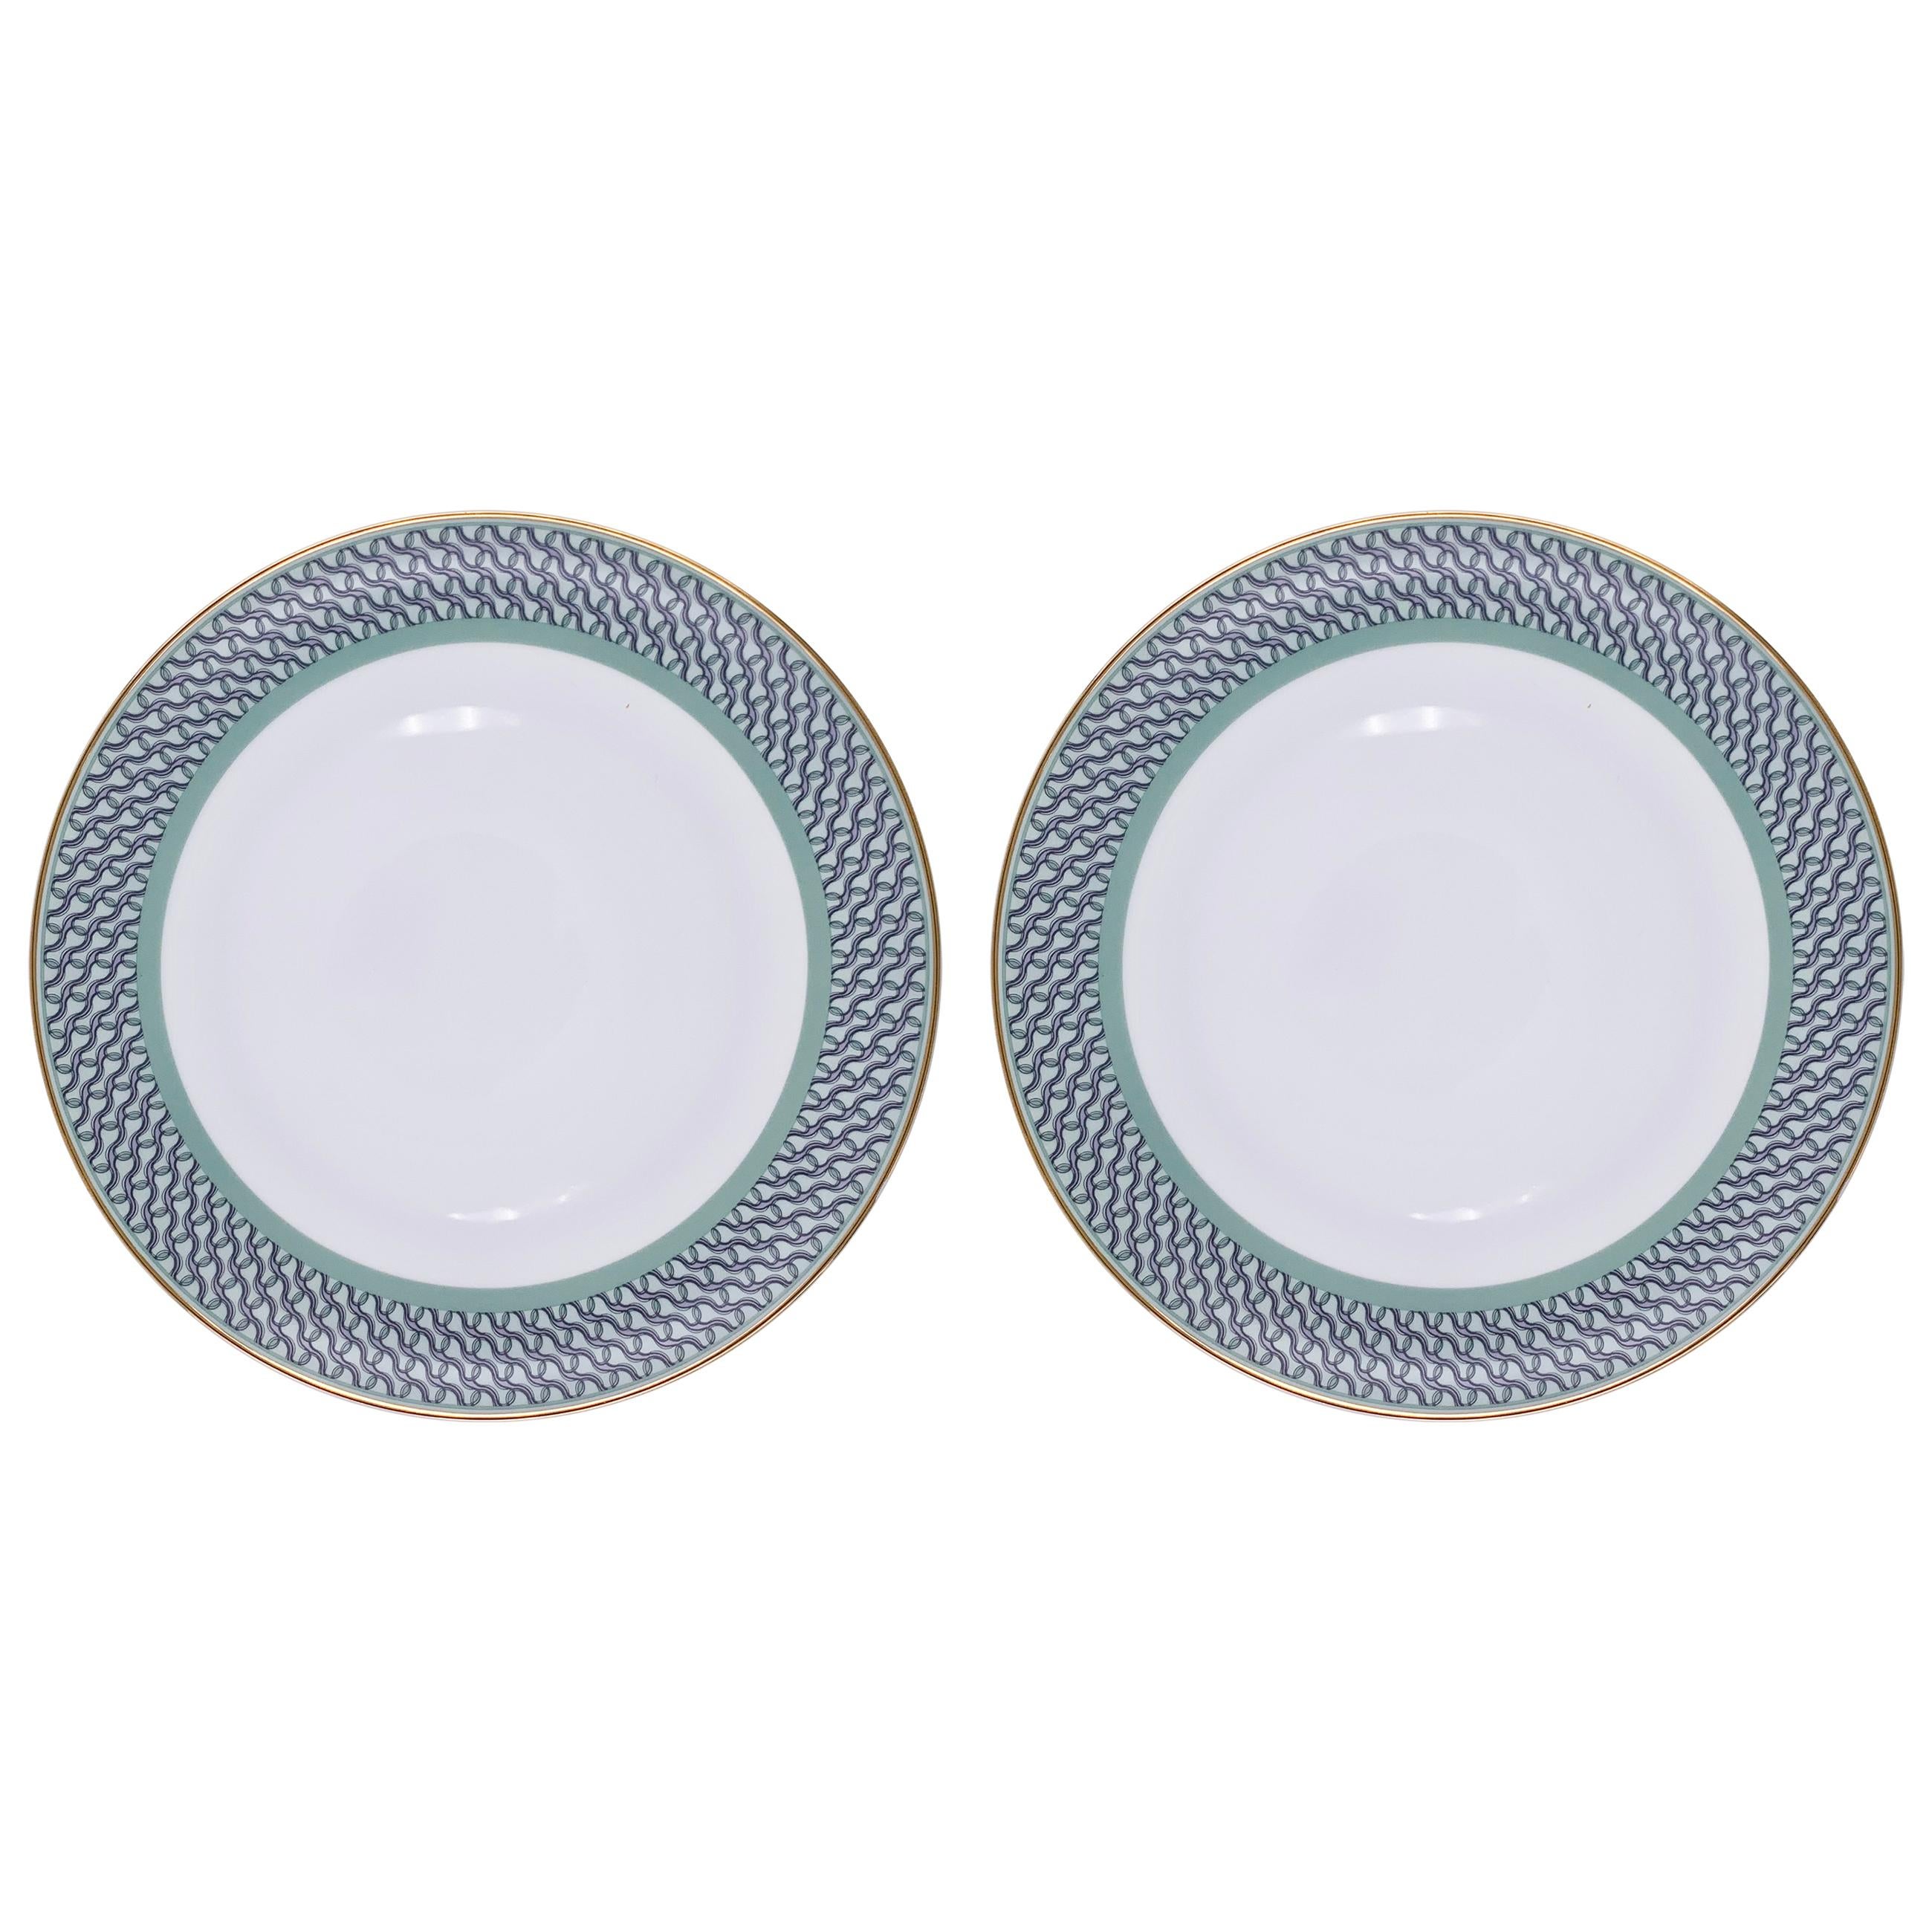 Set of 2 Dinner Plate Ring Mid Century Rhythm André Fu Living Tableware New